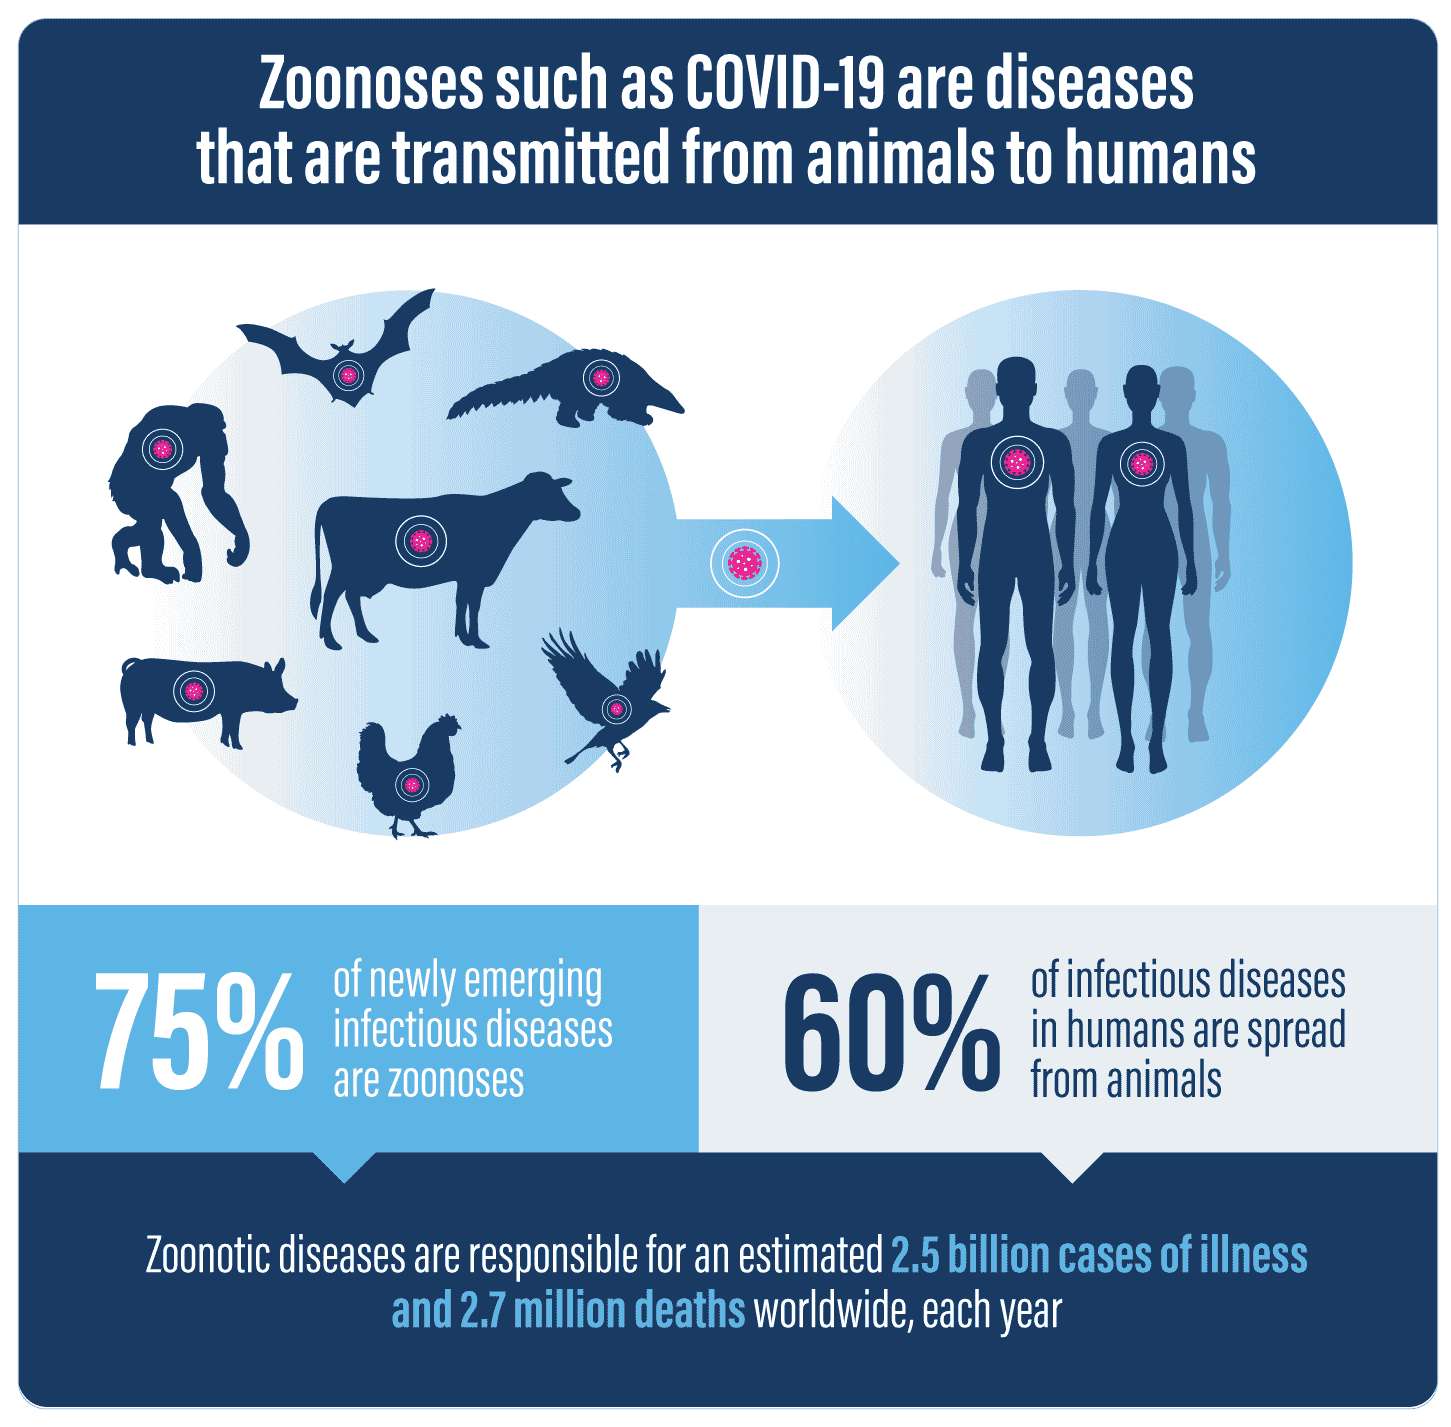 A majority of diseases spread in humans are due to zoonotic diseases.